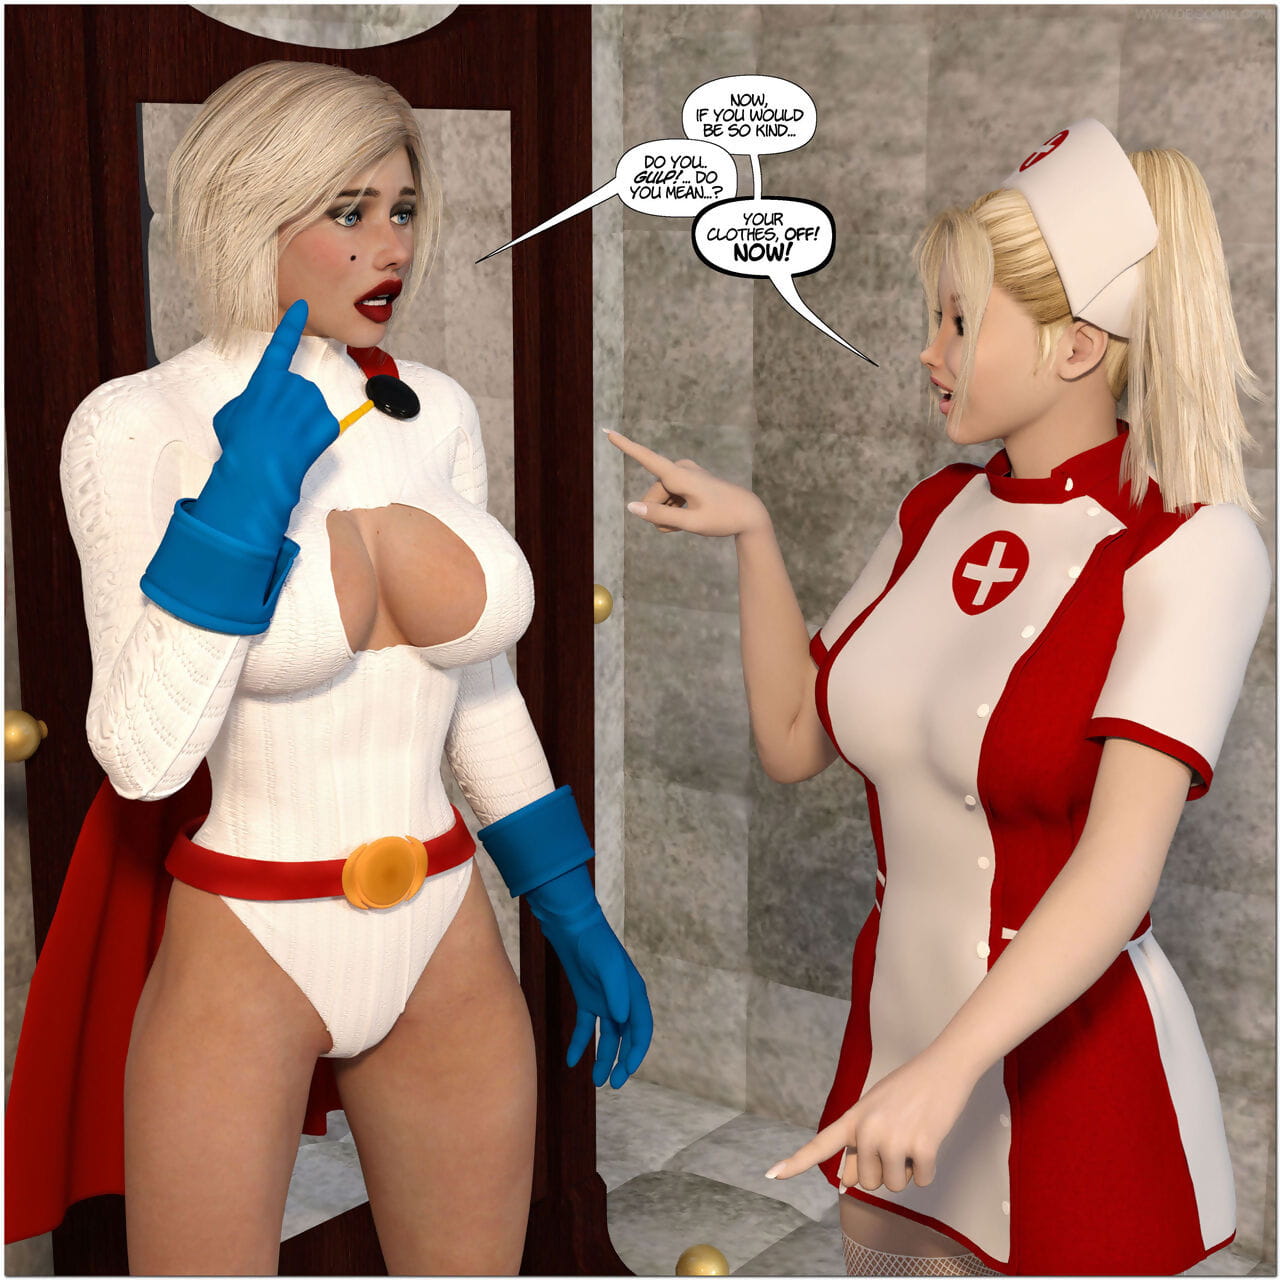 New Arkham For Superheroines 1 2nd Edition - Humiliation and Degradation of Power Girl page 1